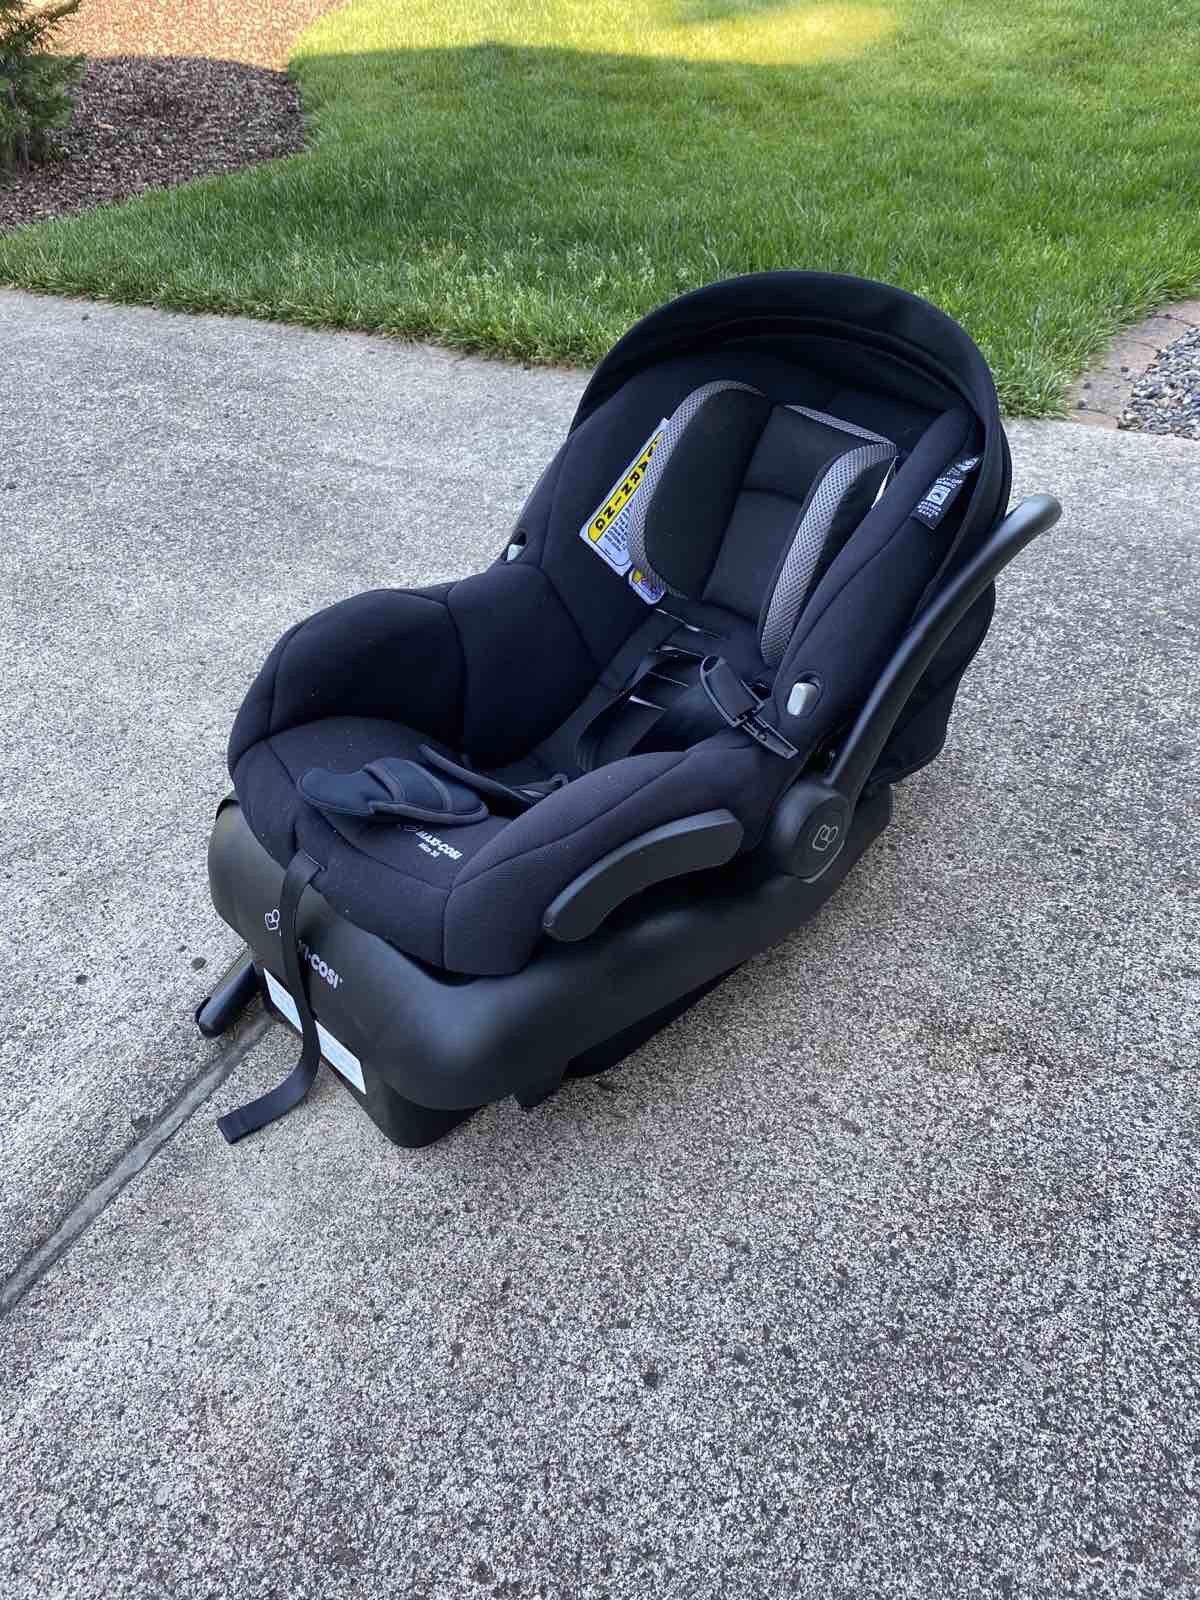 Maxi-Cosi Mico 30 Infant Car Seat with Base, Night Black, One Size Rear